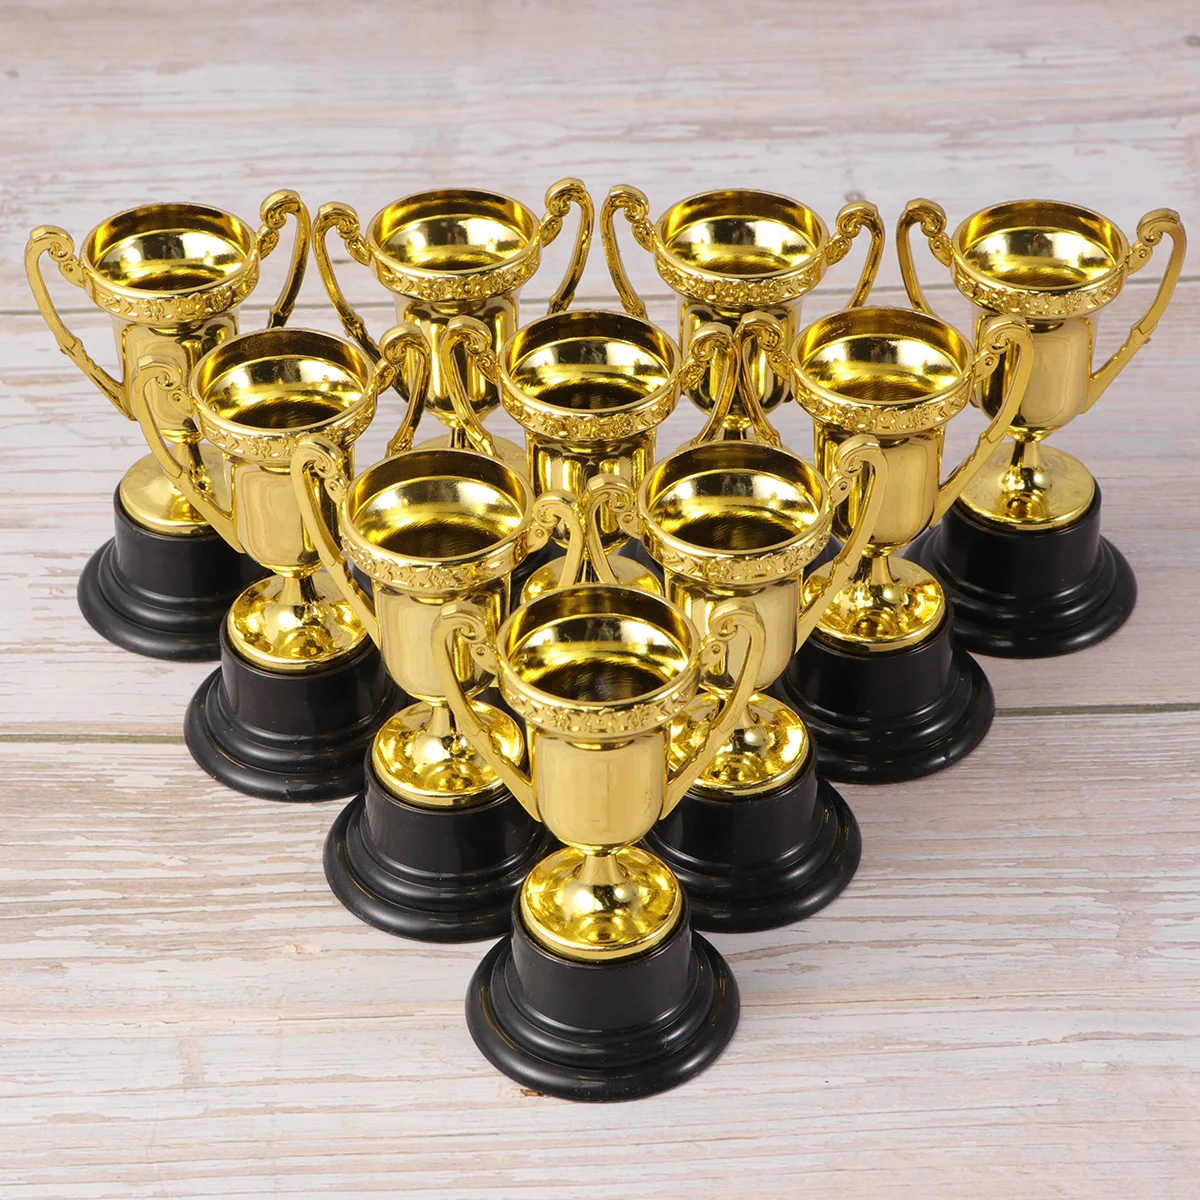 

25pcs Plastic Mini Trophy Student Sports Award Trophy With Base Reward Competitions Children Toys For Game School Kindergarten